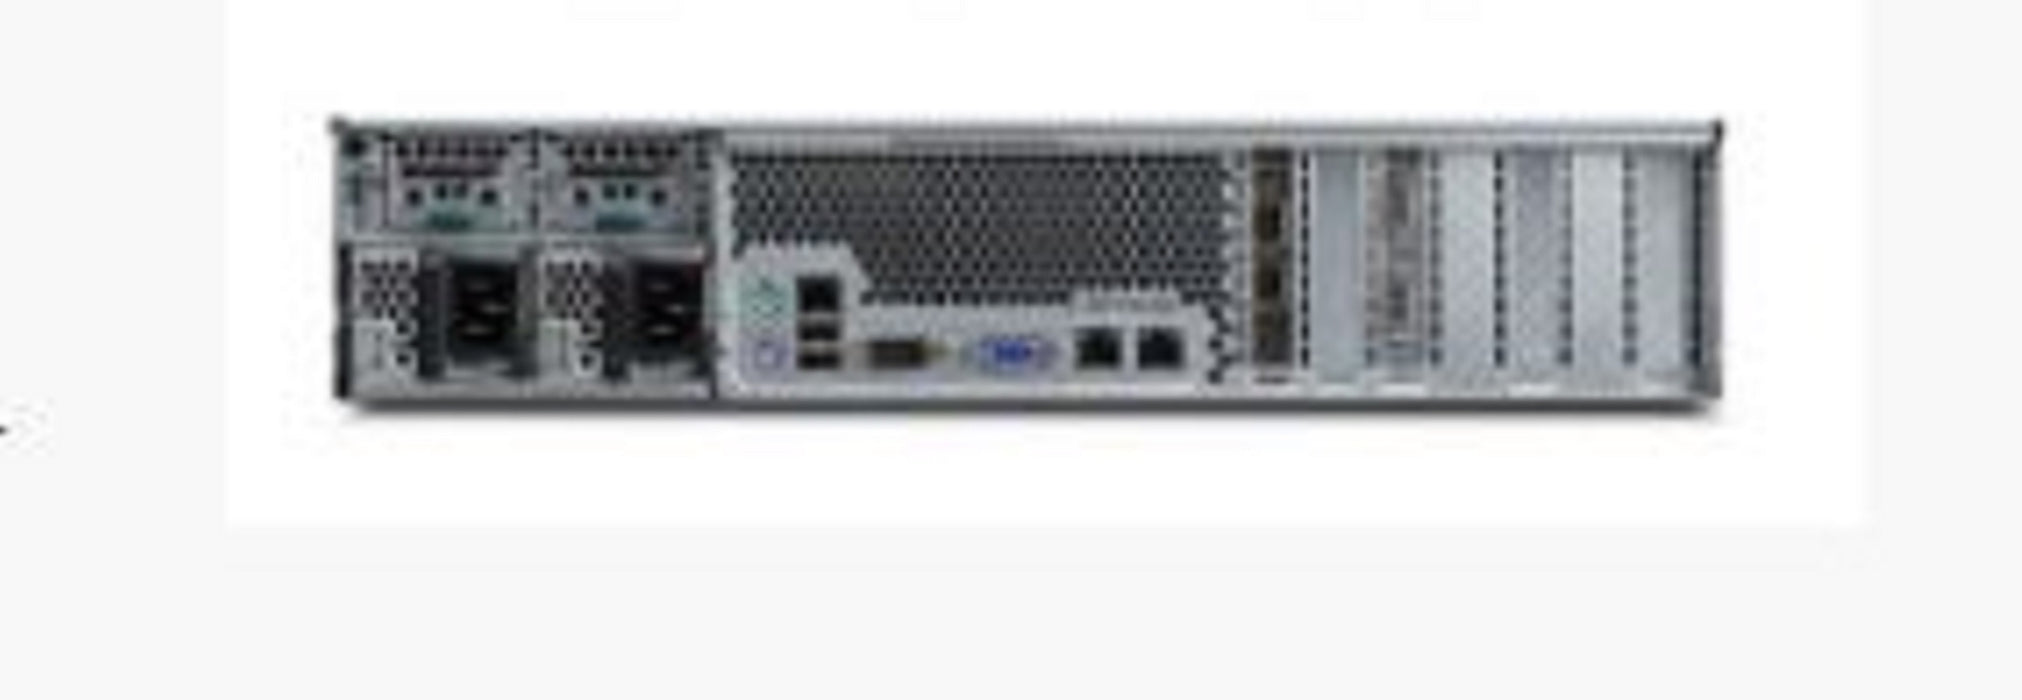 Isilon X200 18TB 3-Node Cluster with 2 x 8-Port Infiniband switches